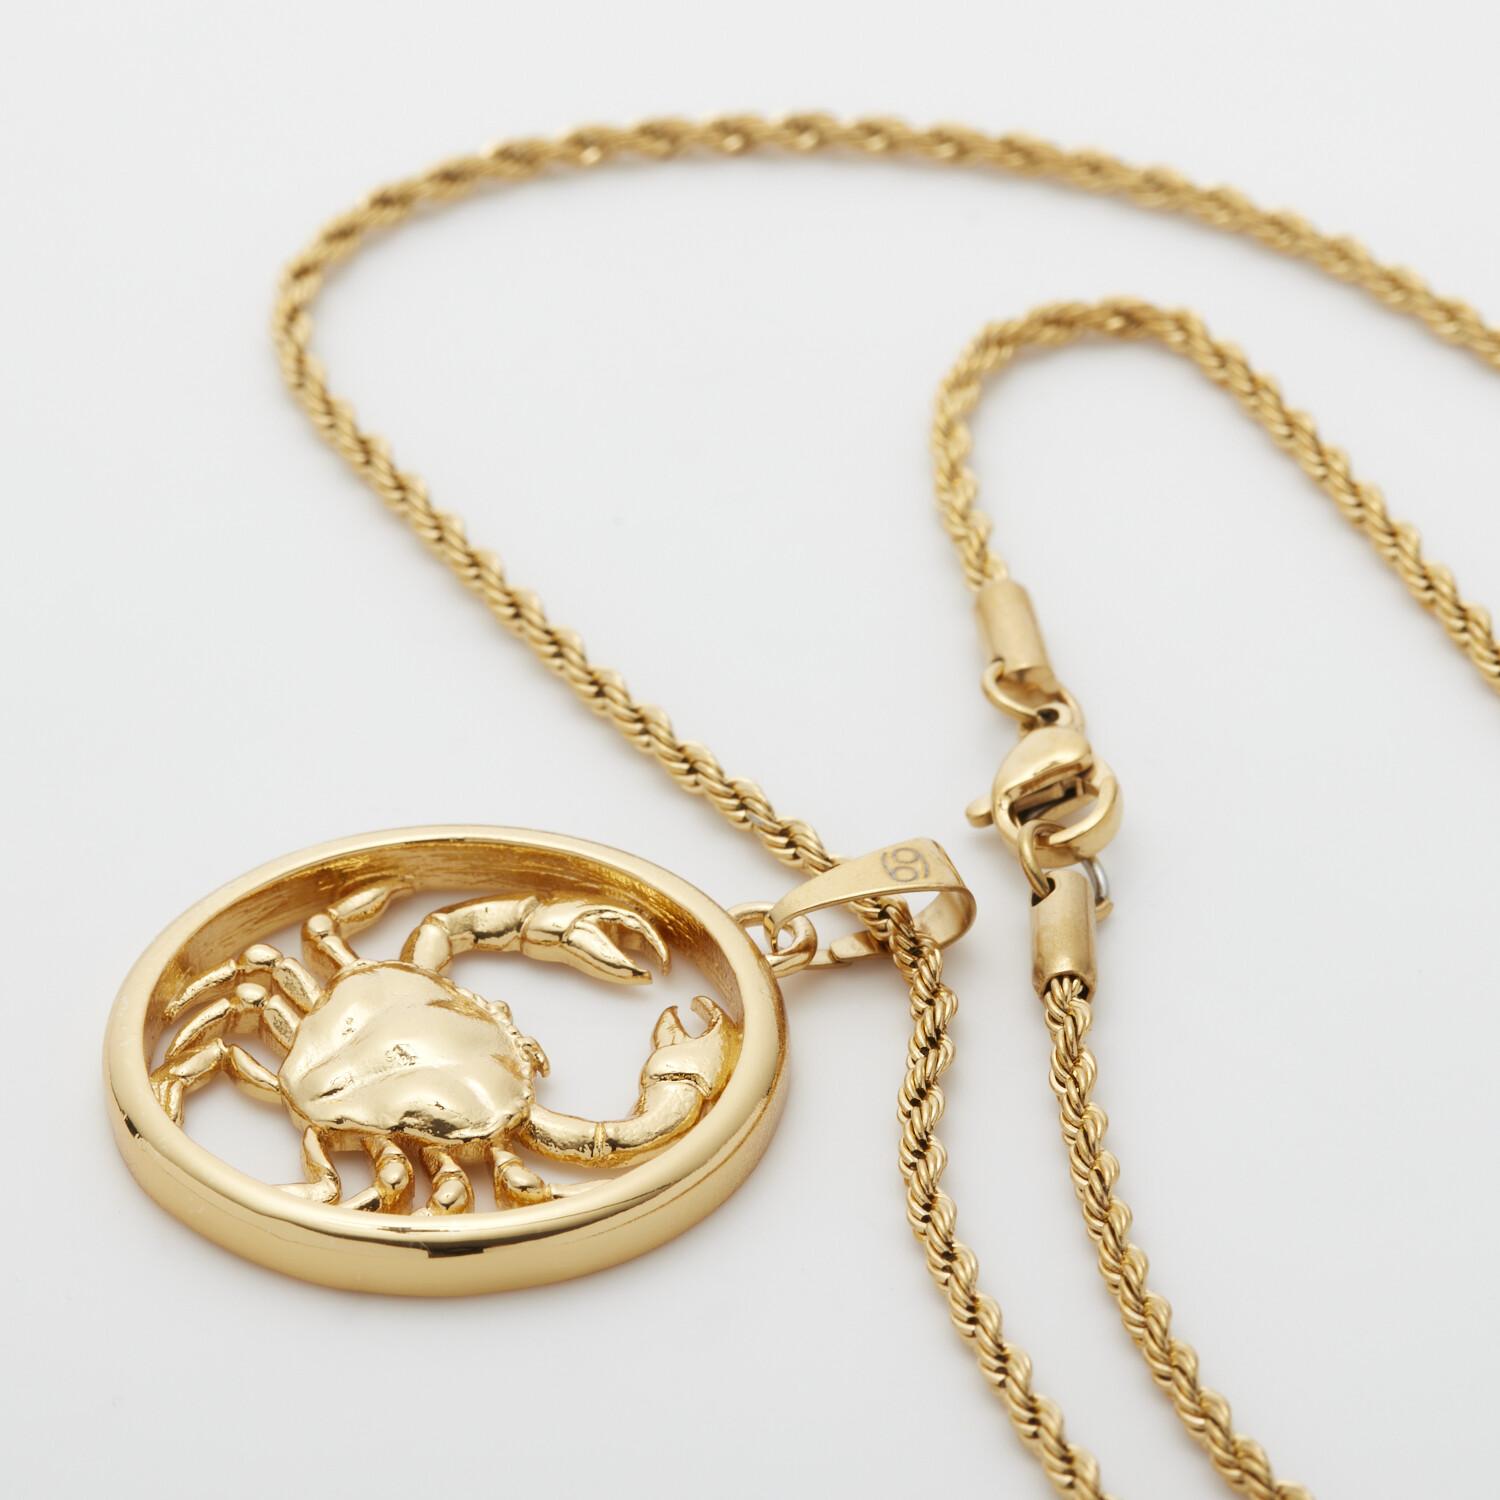 Women's or Men's Eternally Cancer, Pendant Necklace Dipped in 24k Gold For Sale